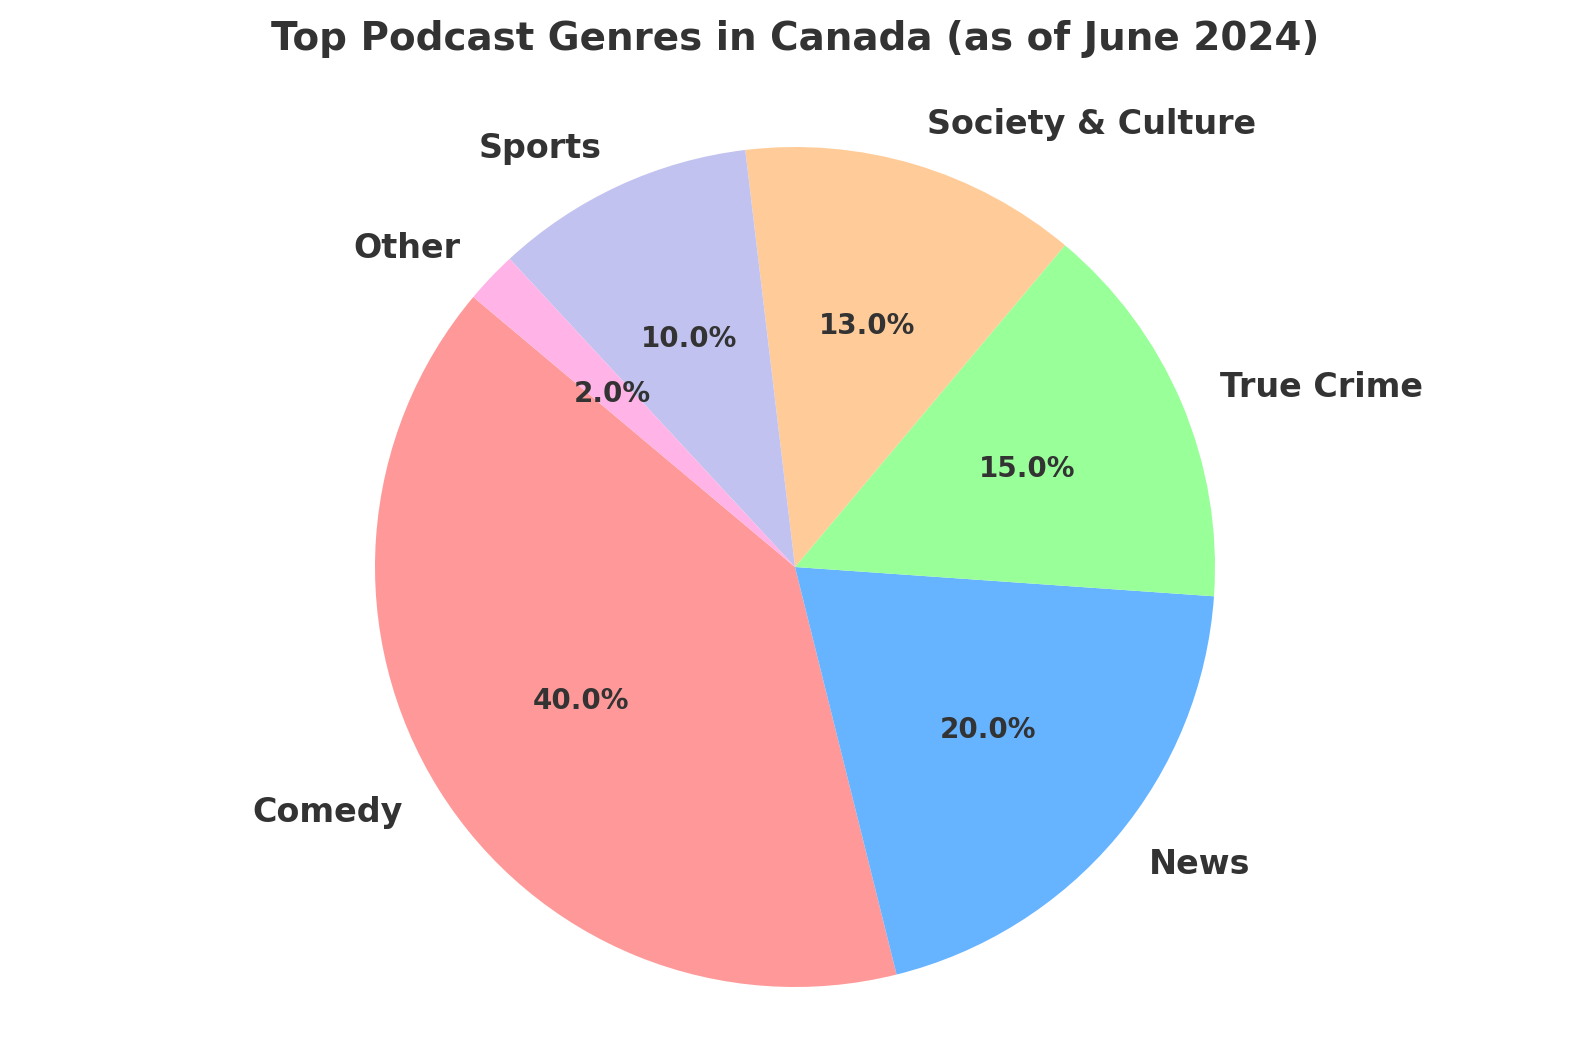 Top Podcast Genres in Canada (as of June 2024)